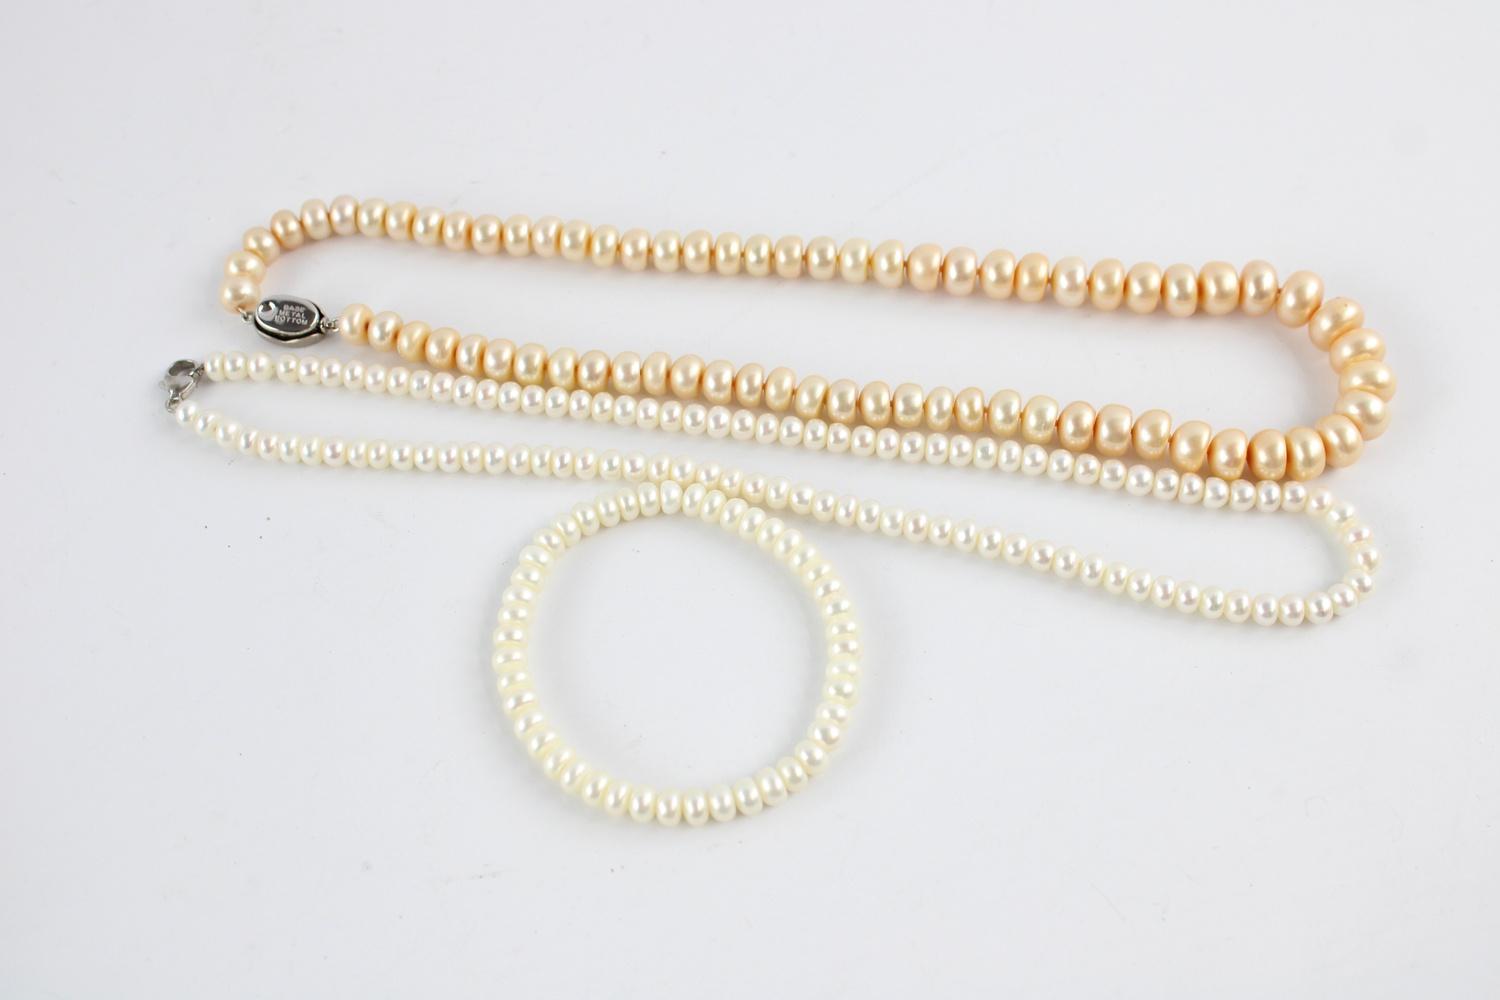 .925 Sterling silver clasped honora pearl branded pearl necklaces w/original packaging - Image 5 of 6